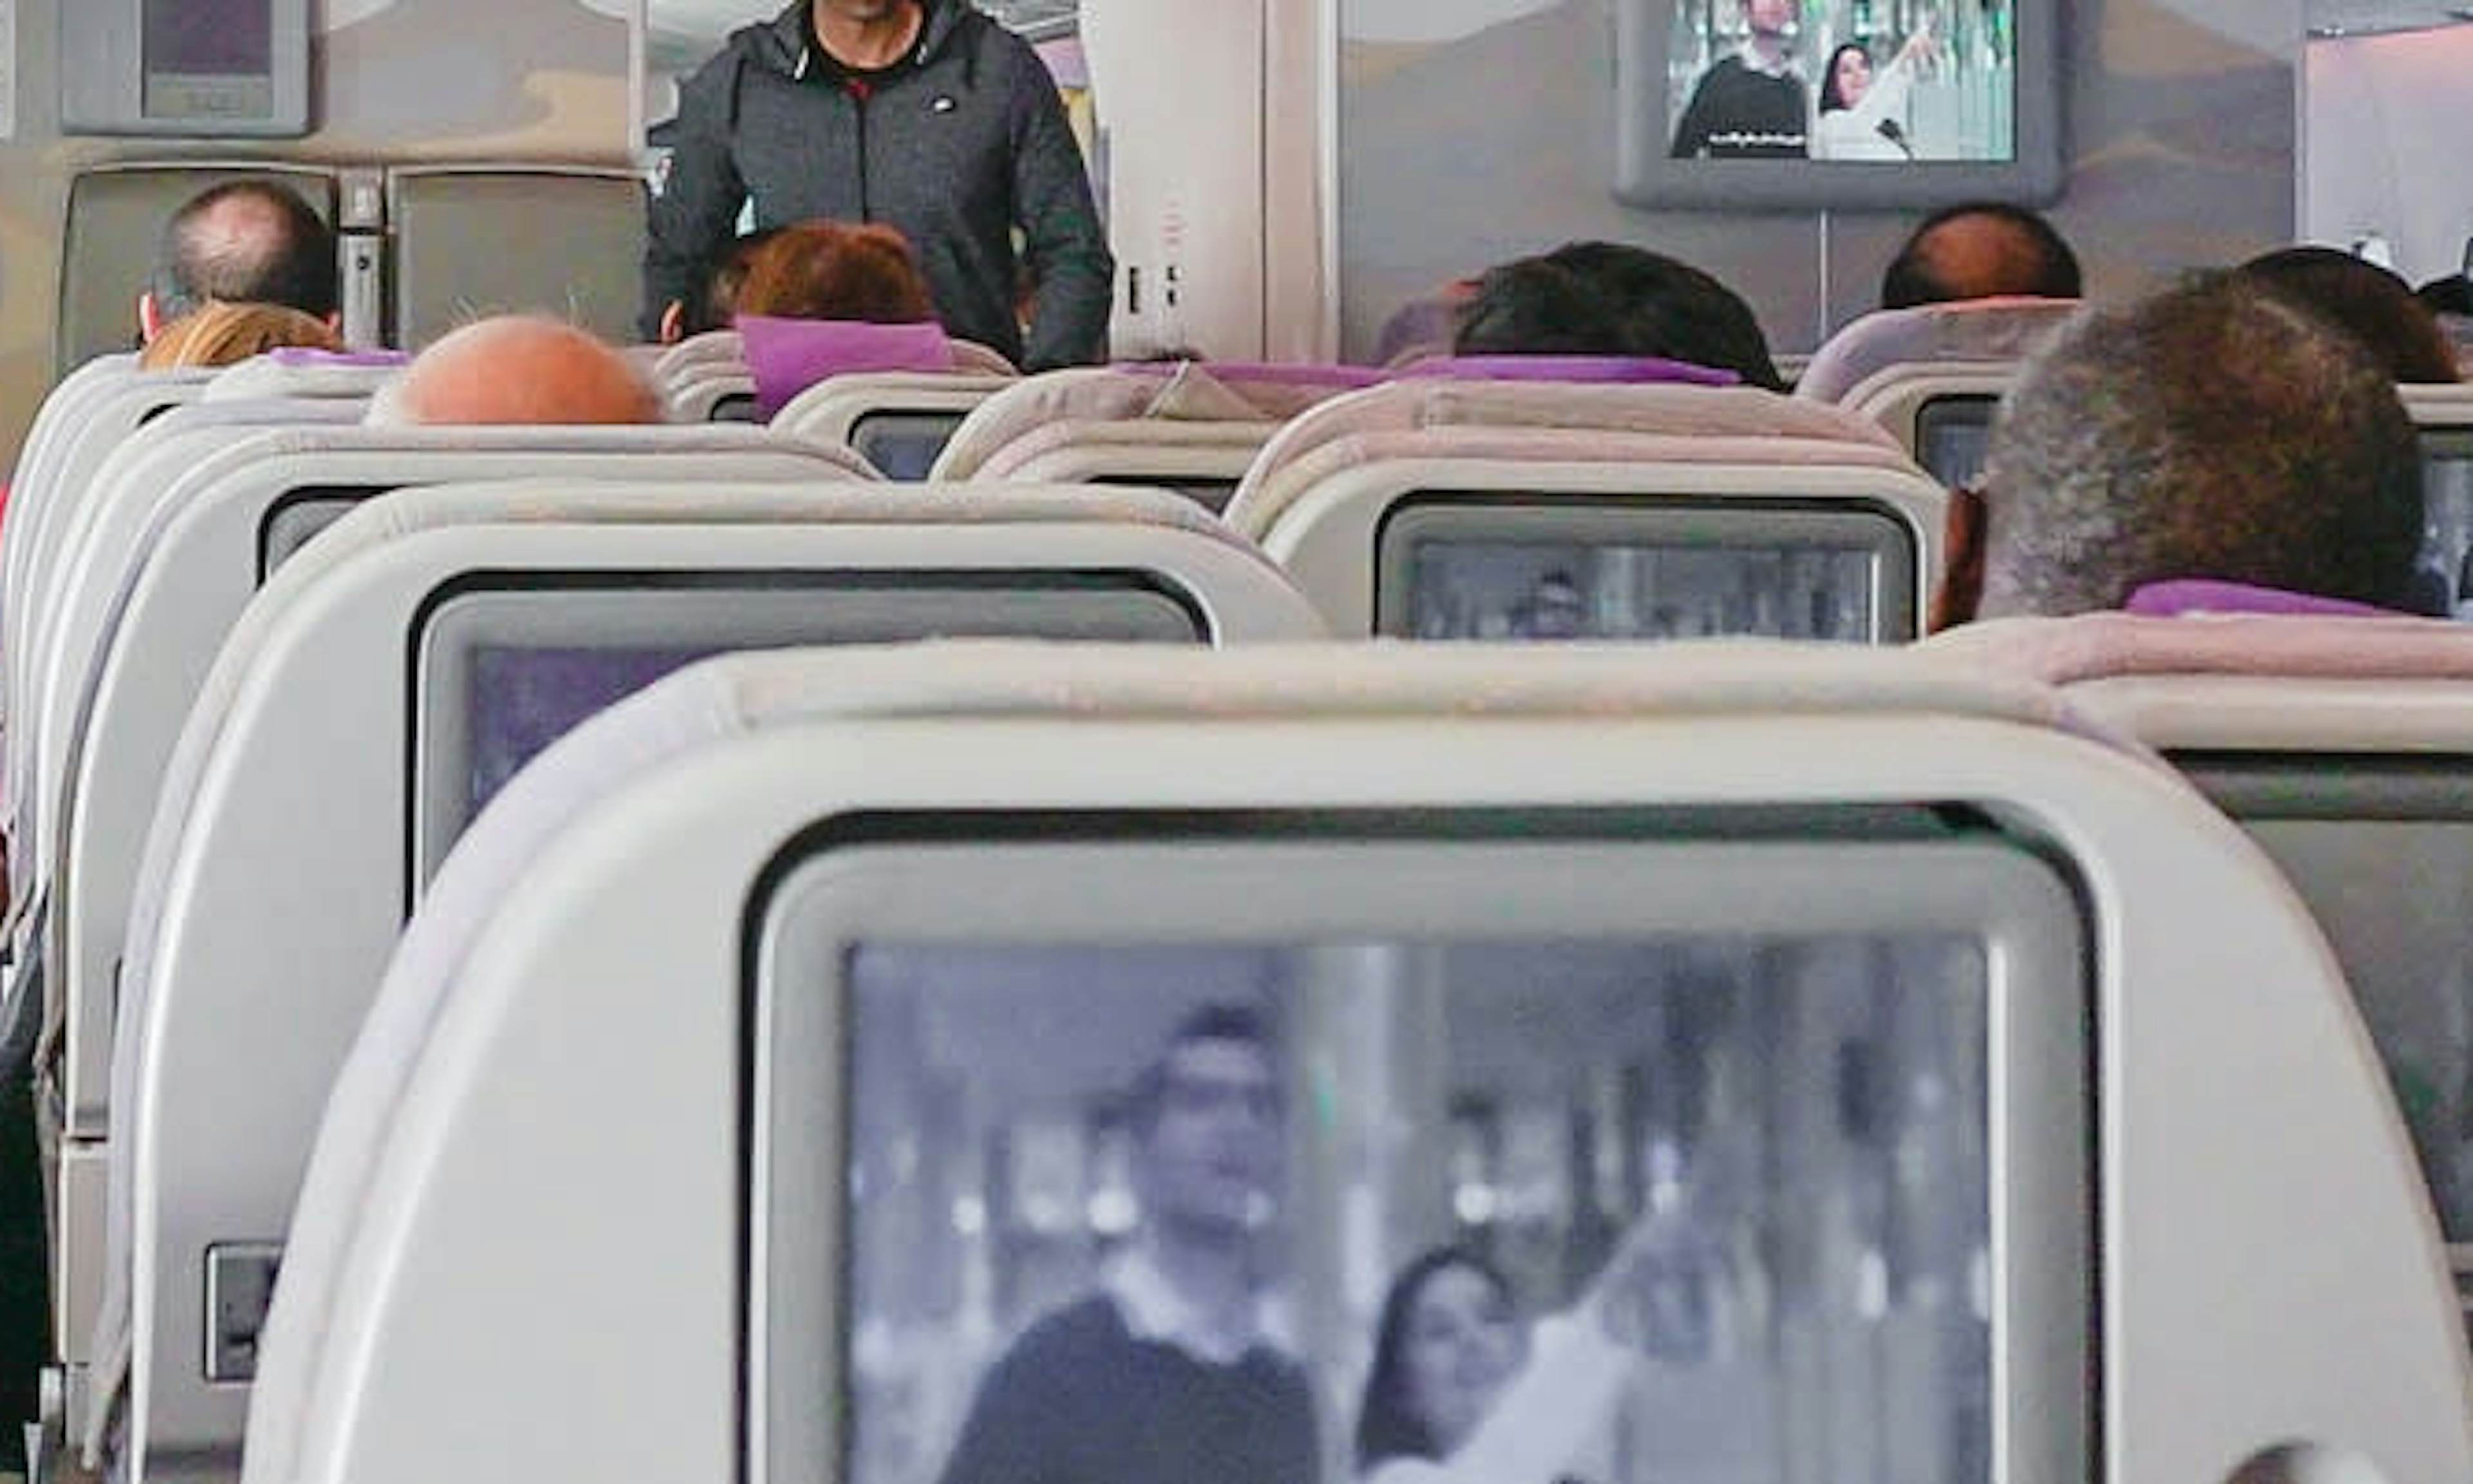 Seats on airplane with tv screen on each seat